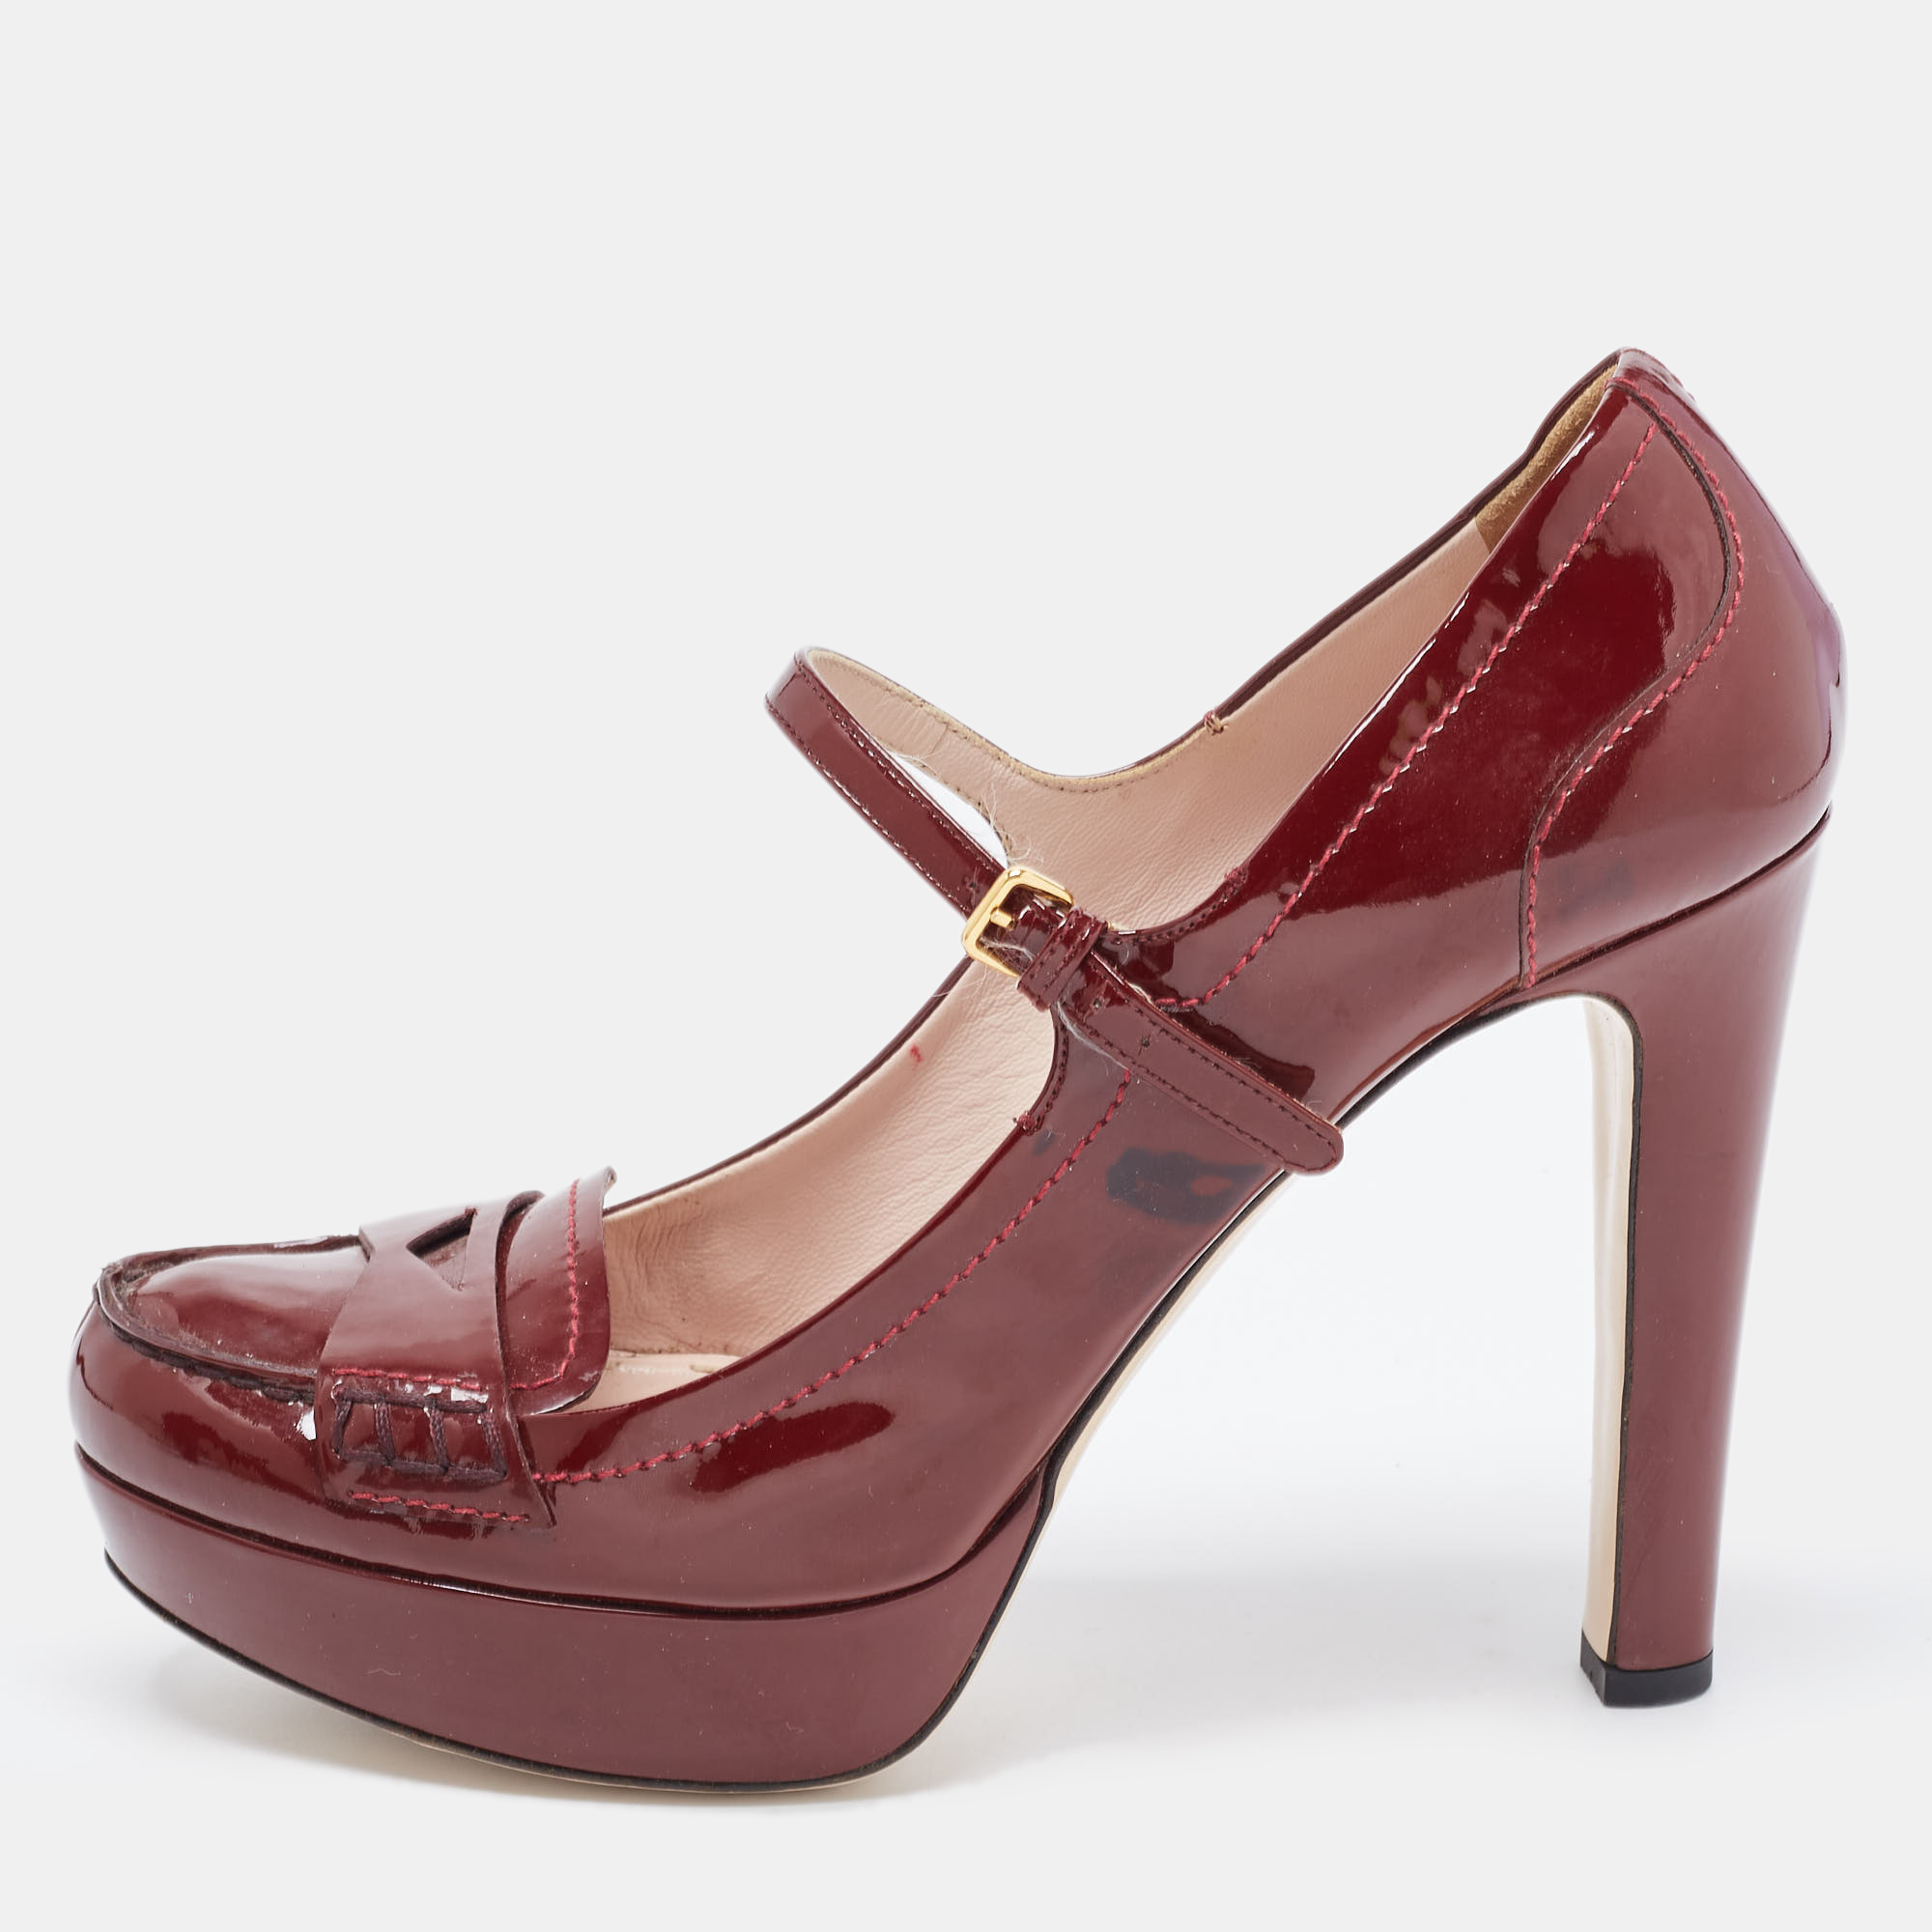 Pre-owned Miu Miu Burgundy Patent Leather Penny Loafer Platform Pumps Size 39.5